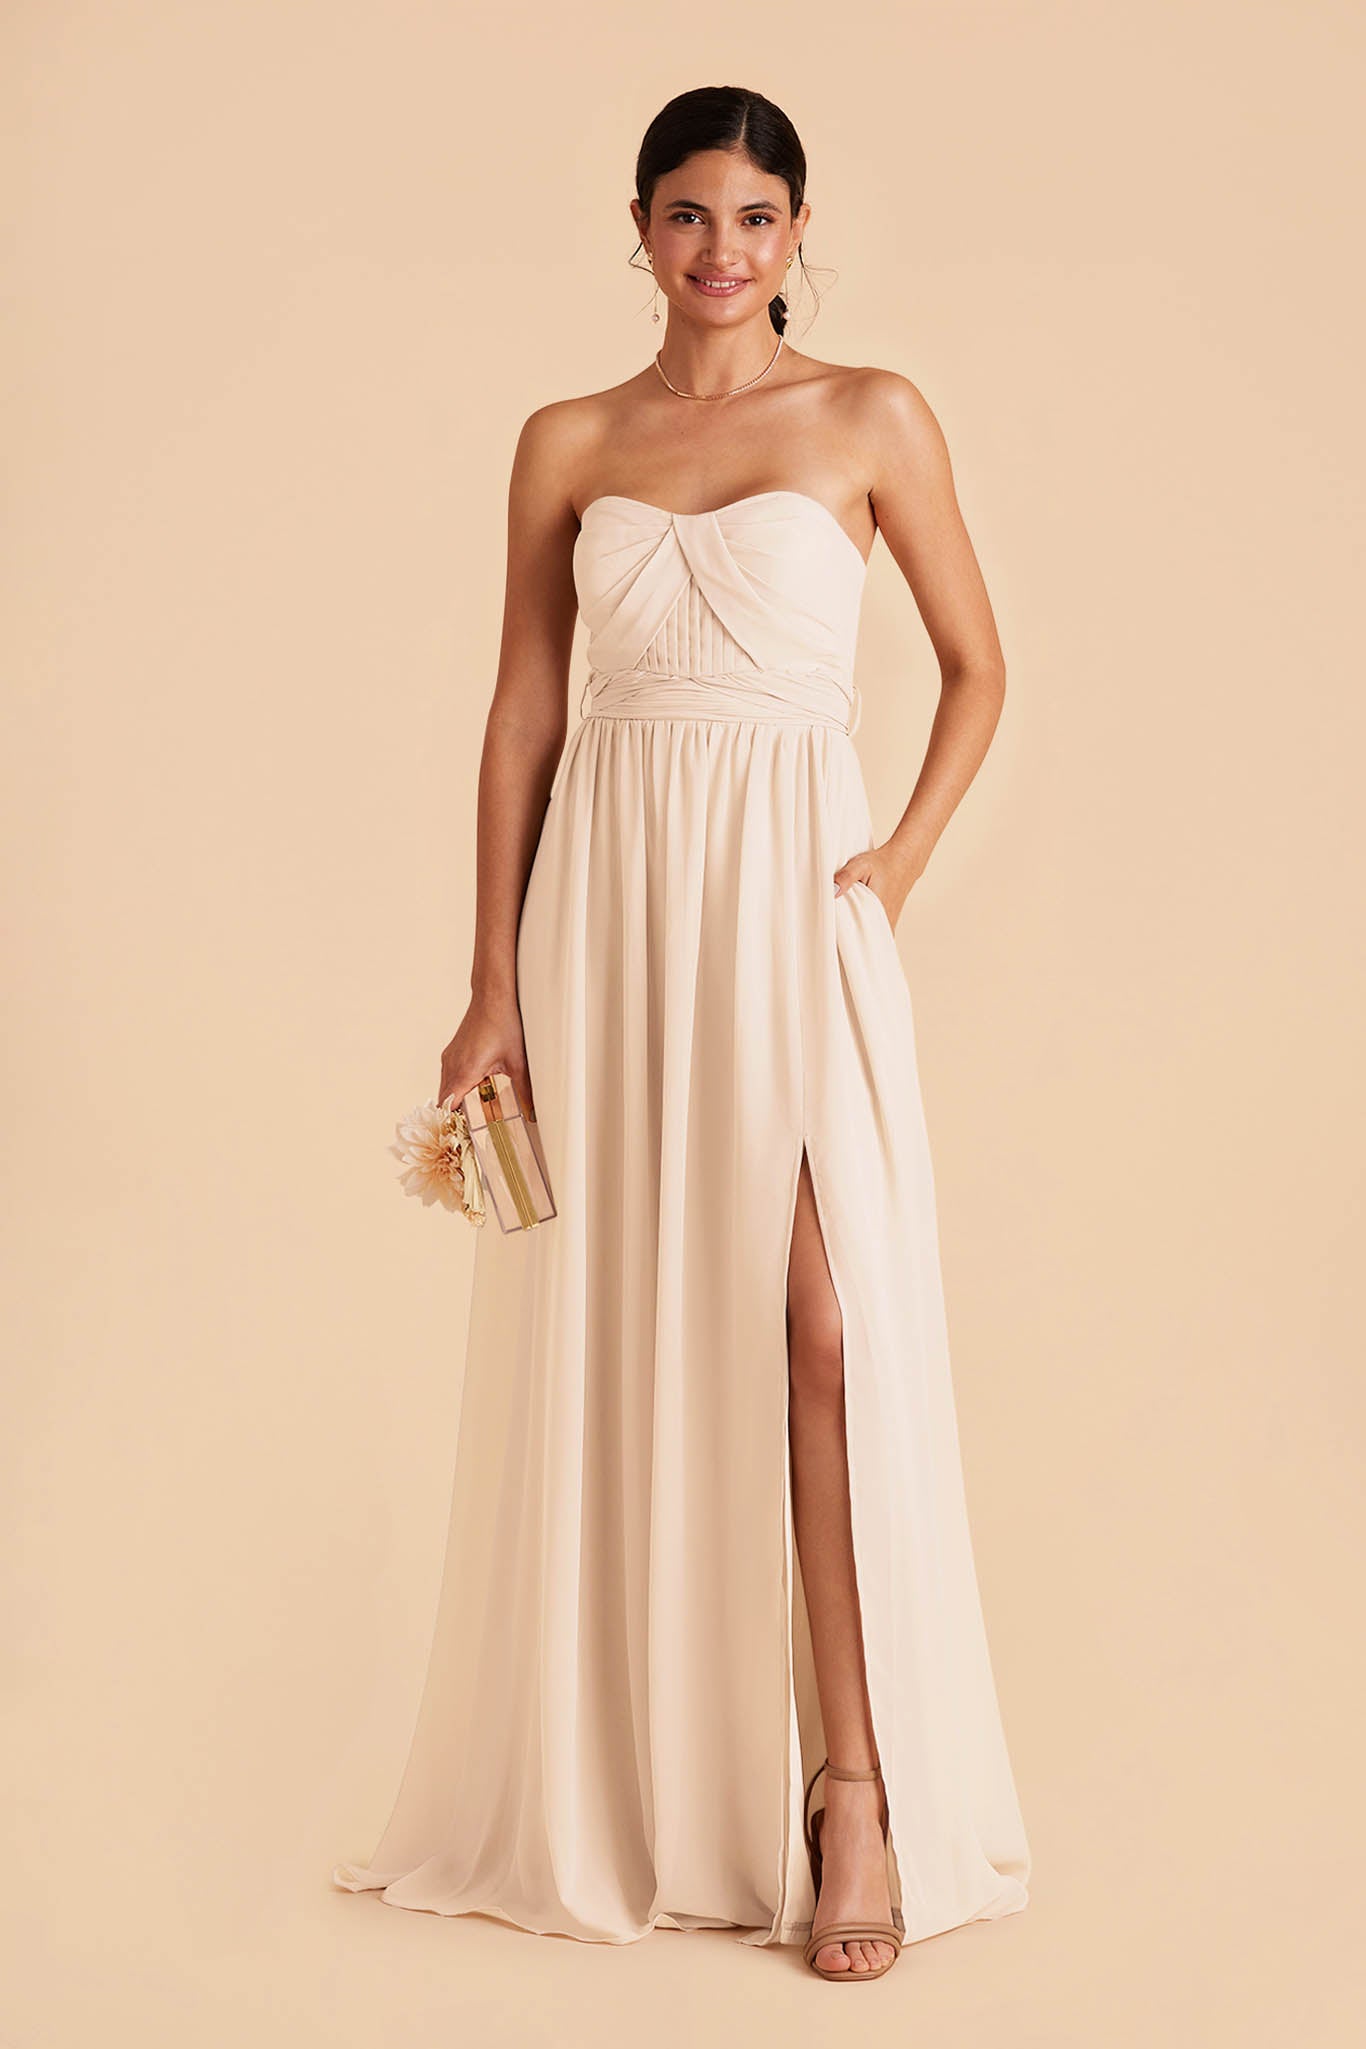 Champagne Grace Convertible Dress by Birdy Grey